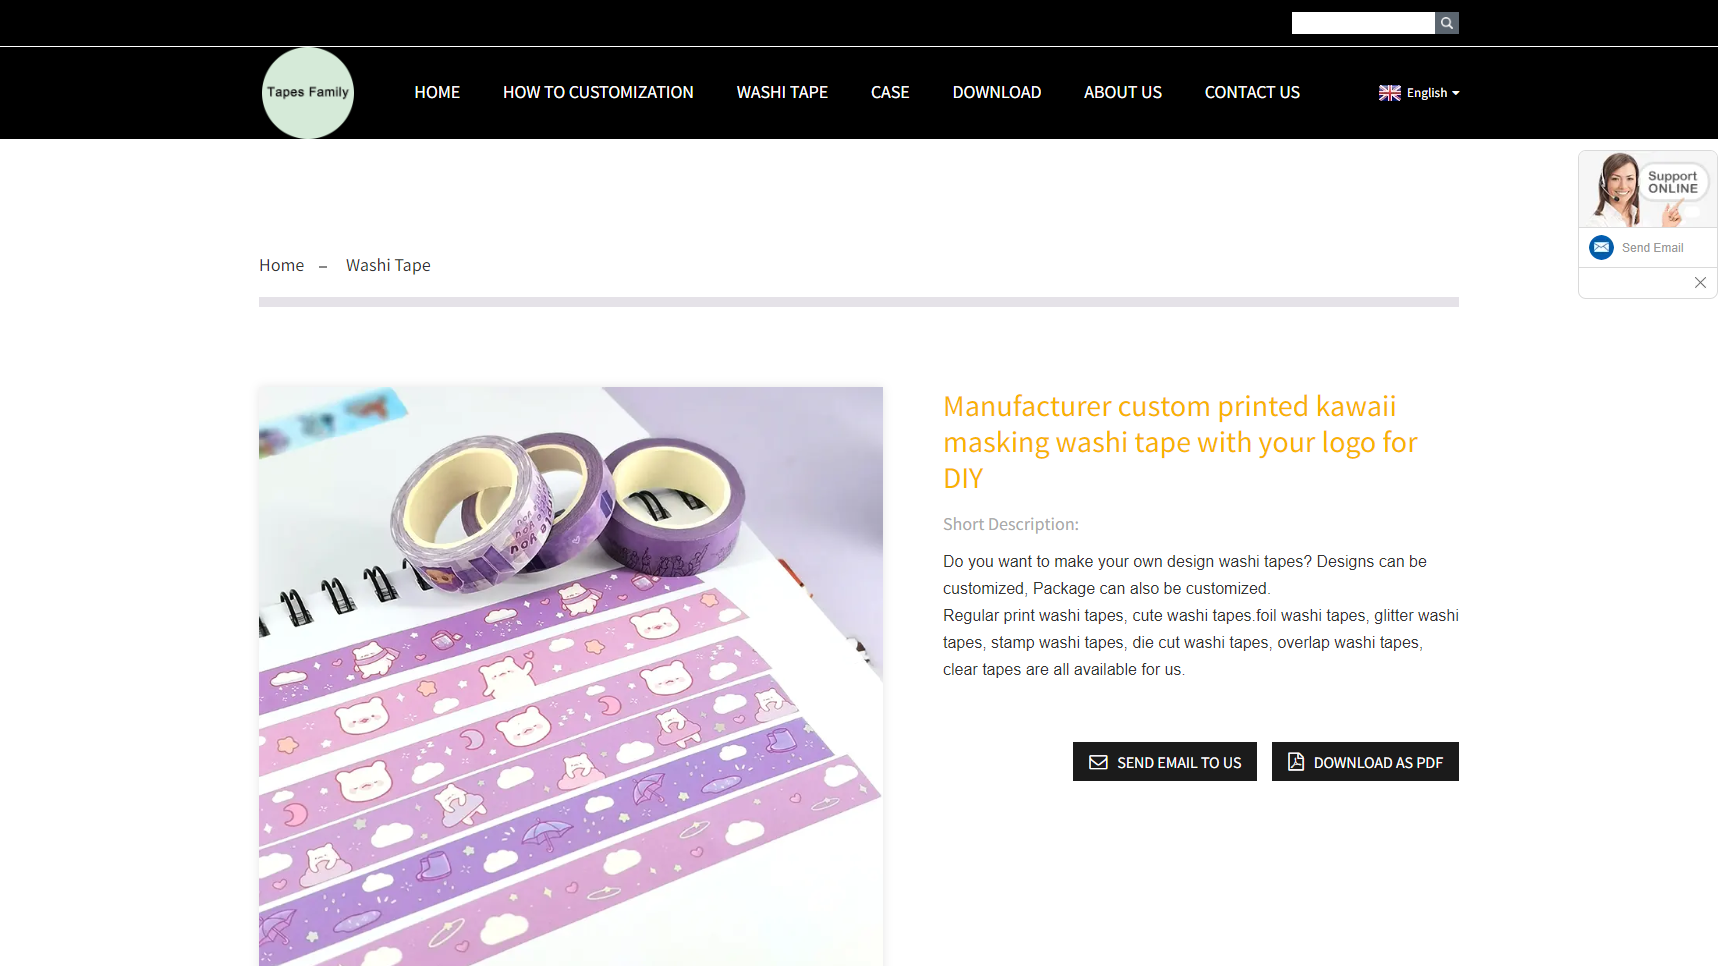 Tapes Family - Washi Tape Manufacturer